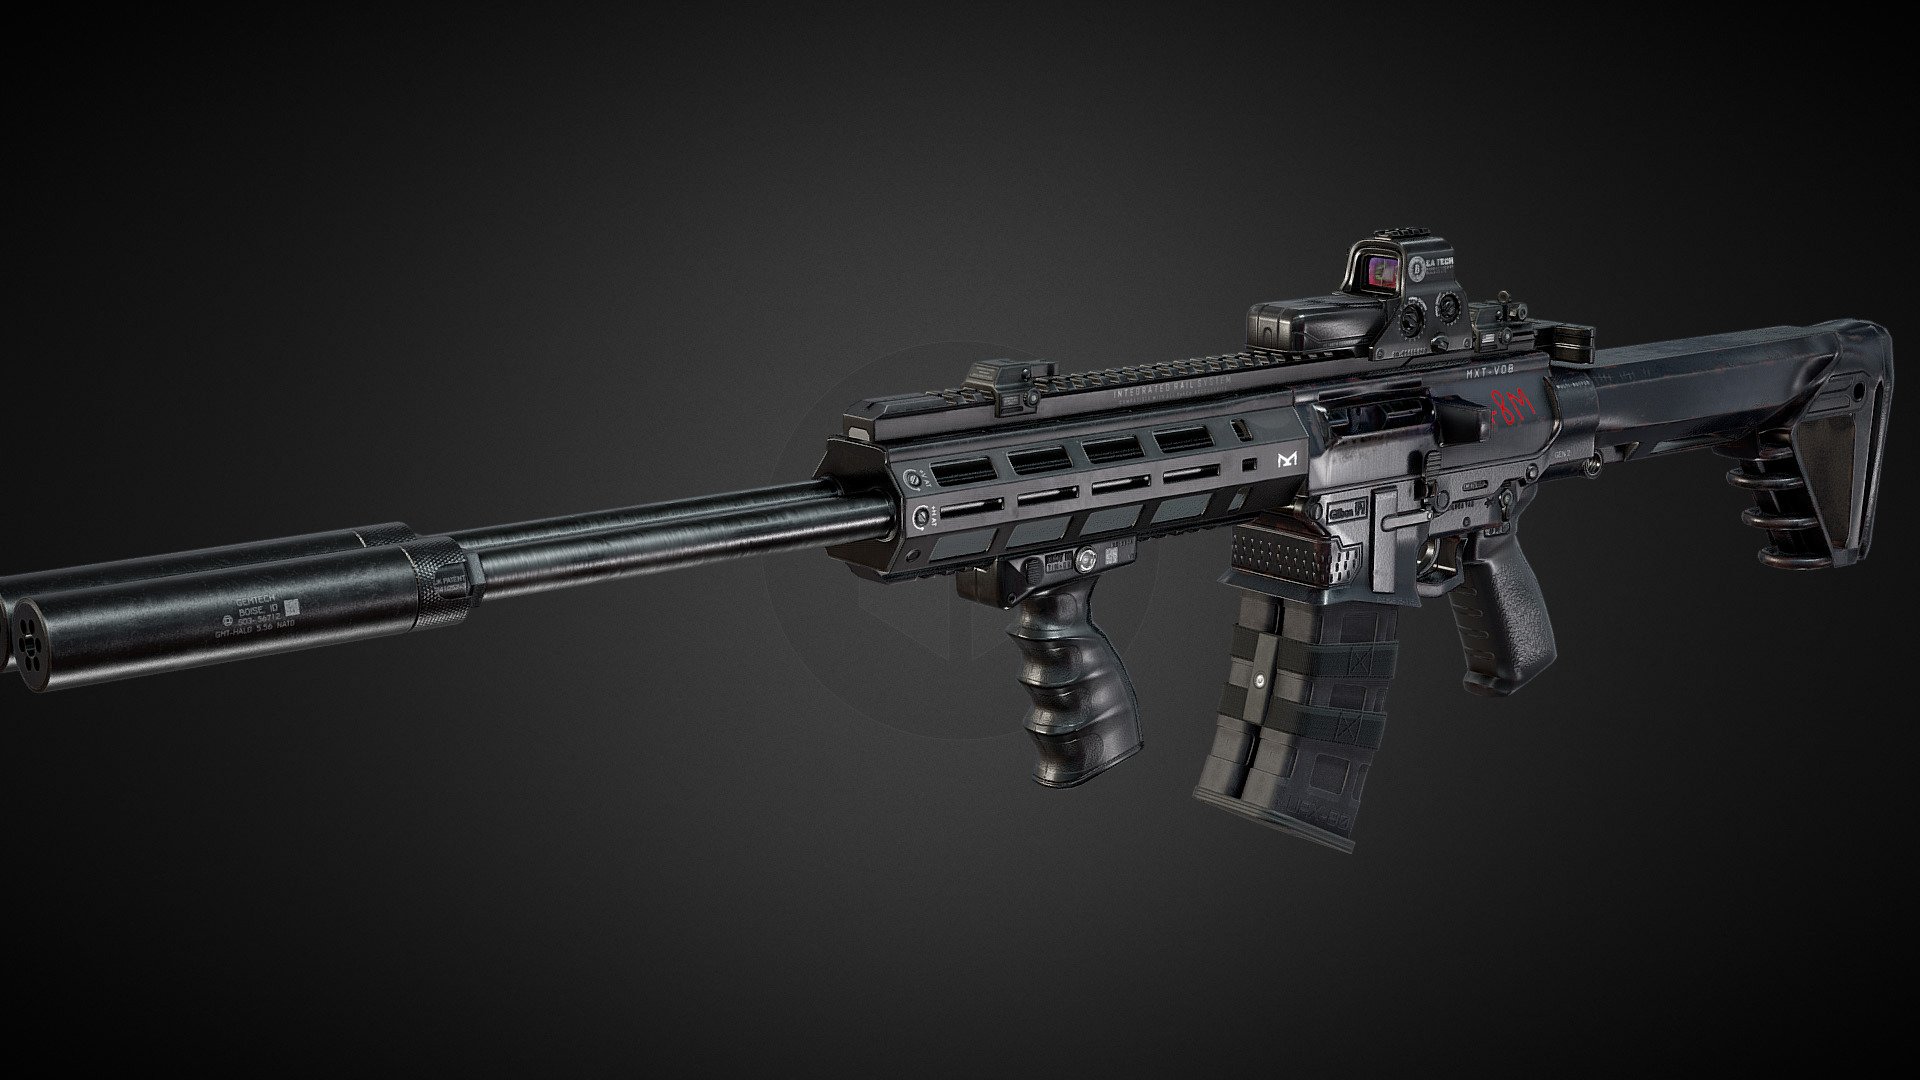 A double Barreled AR-15 with two triggers, two magazines and two buffer tubes, includes 4k textures for the main barrel and individual texture sets for the silencers, the magazines, iron sights, Holosight, Foregrip and bullets.

Modeled in Blender and Textured in Substance Painter.

I initially did this weapon as a mod for Fallout 4 so it has some Fallout themed references 3d model